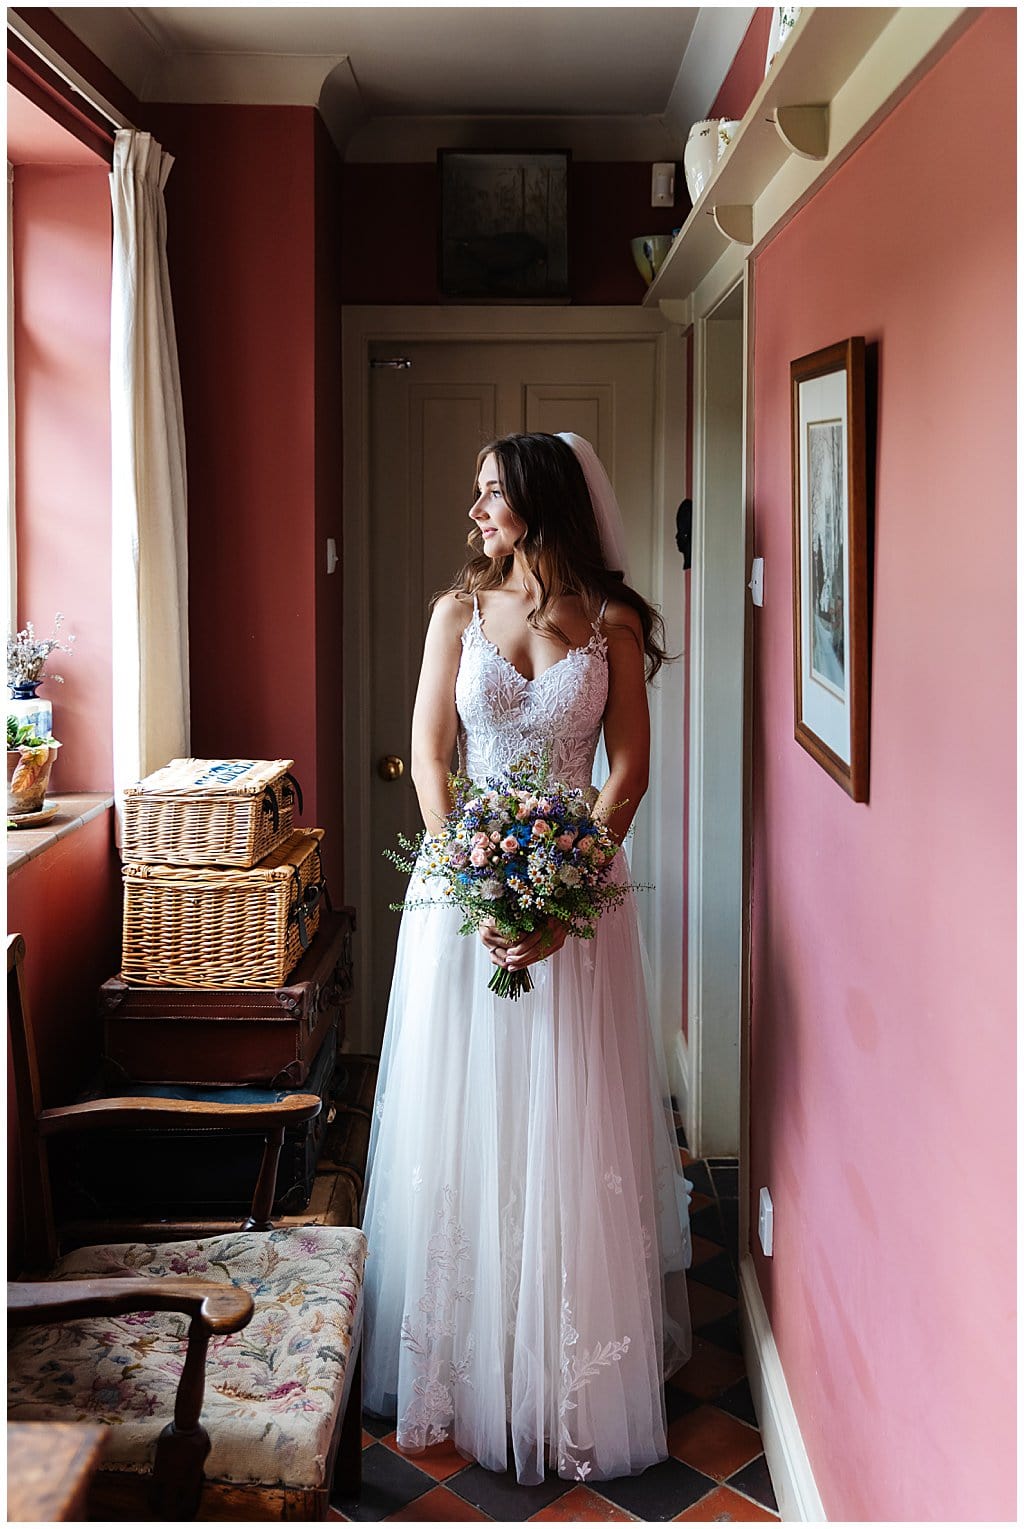 Bride wearing fitted lace bodice with chiffon skirts Pronovias wedding dress, holds country flower bouquet